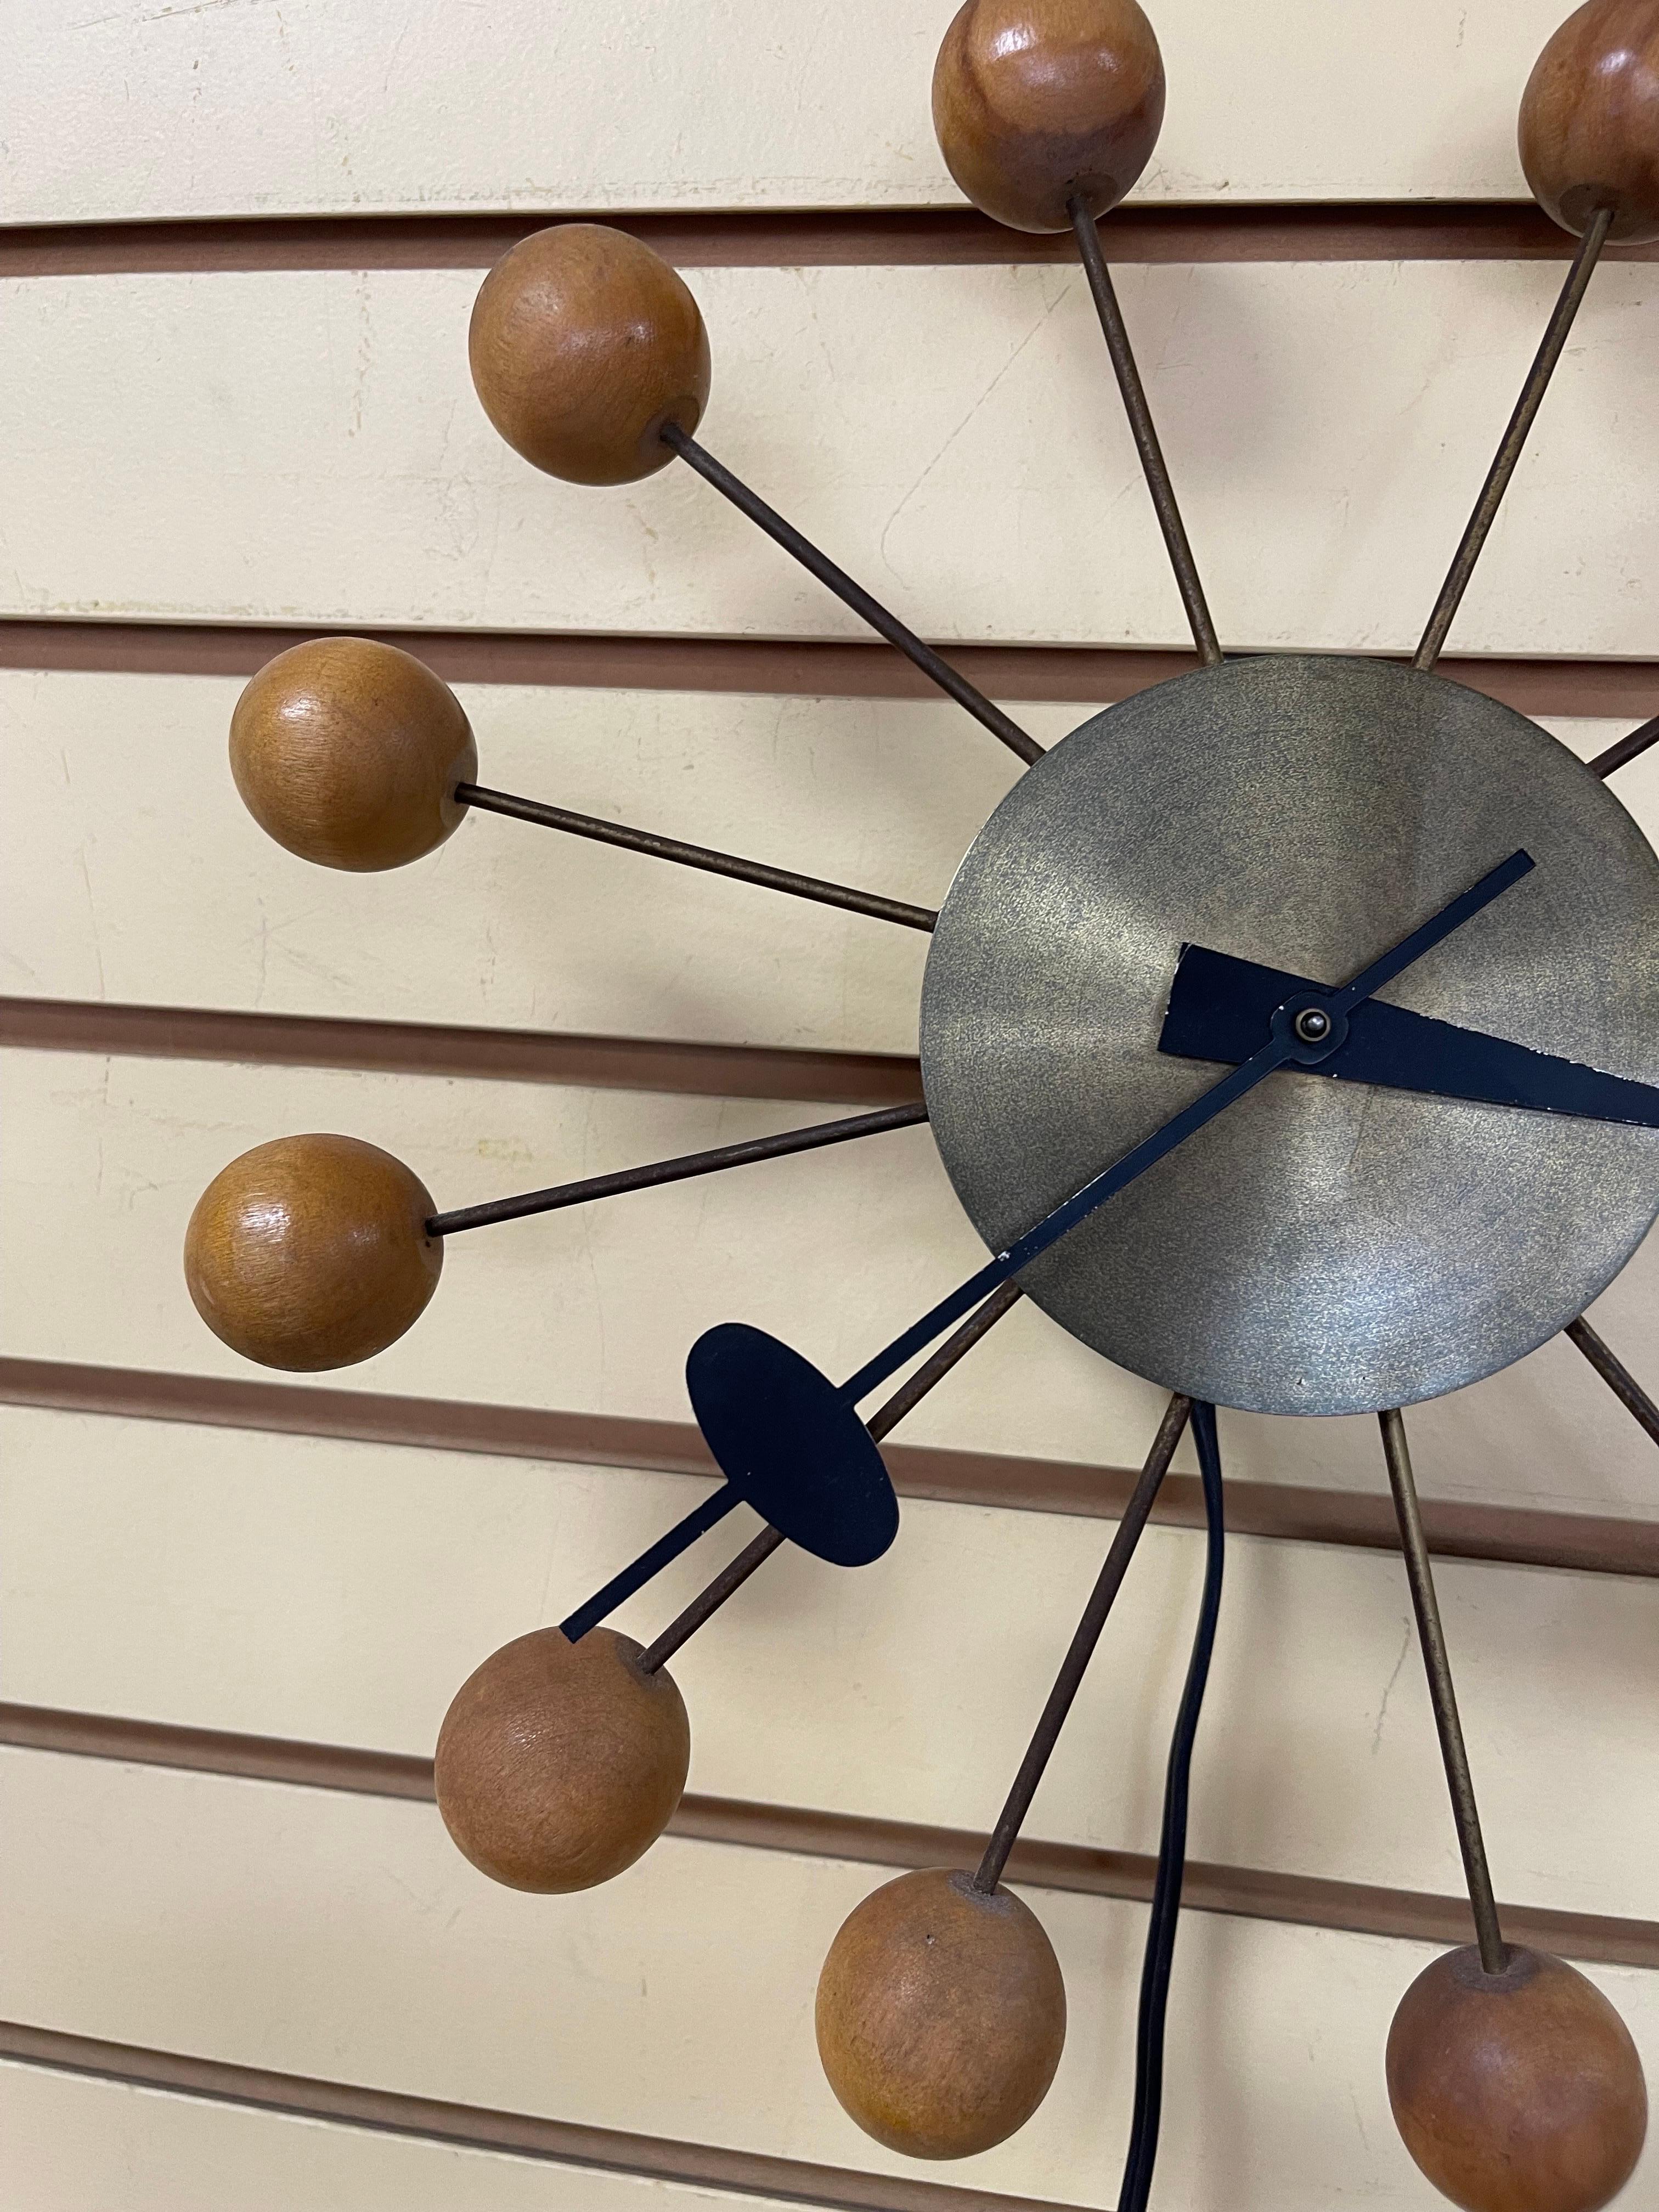 Early Production Iconic Ball Clock Designed by George Nelson for Howard Miller In Fair Condition For Sale In San Diego, CA